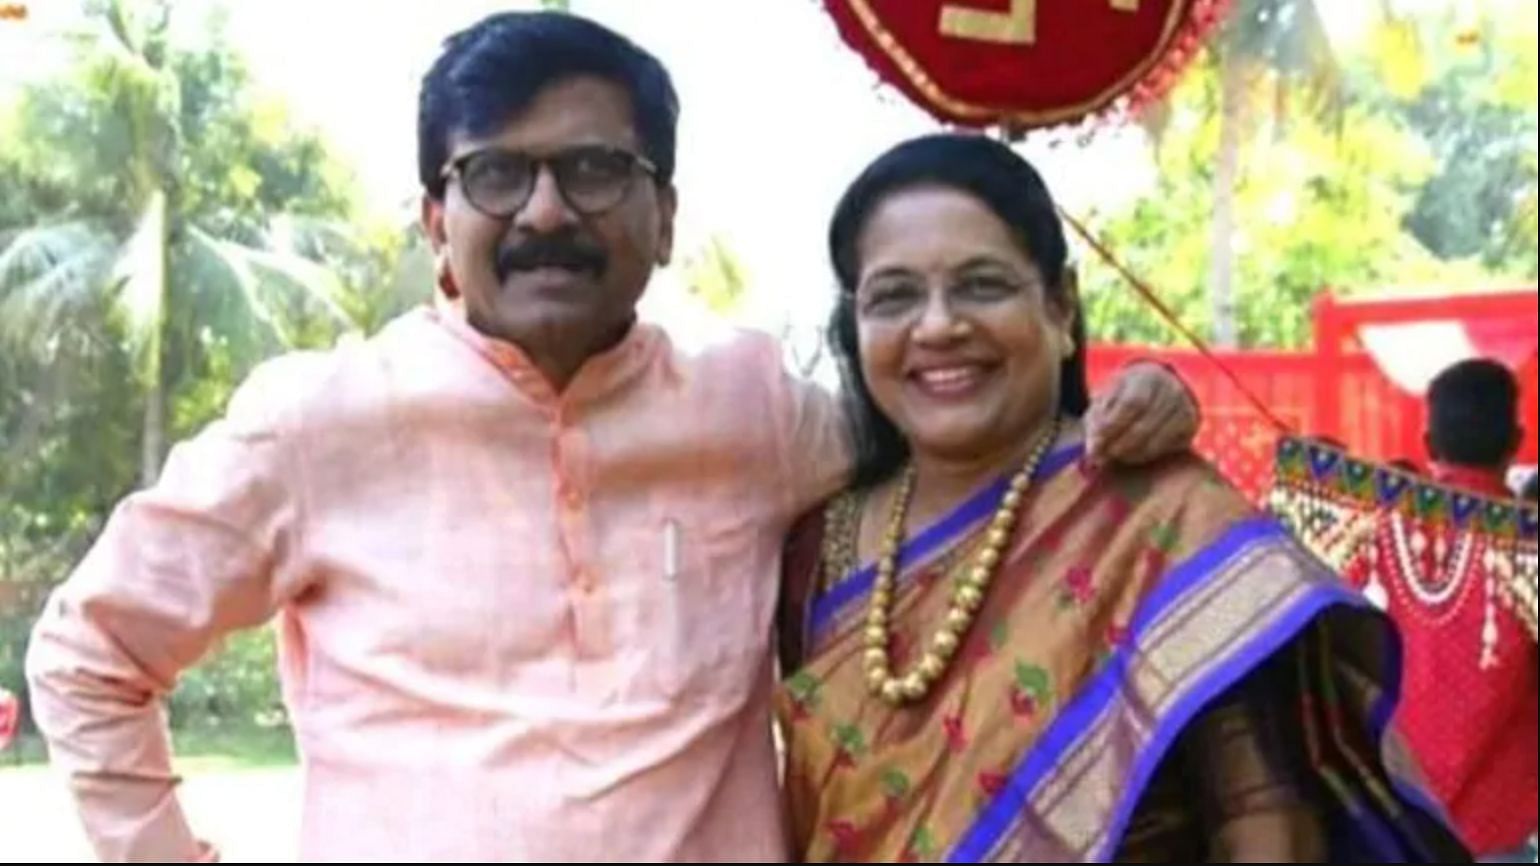 Enforcement Directorate has summoned Varsha Raut, wife of Shiv Sena MP Sanjay Raut, for questioning in the PMC Bank money laundering case on 29 December, officials said on Sunday.